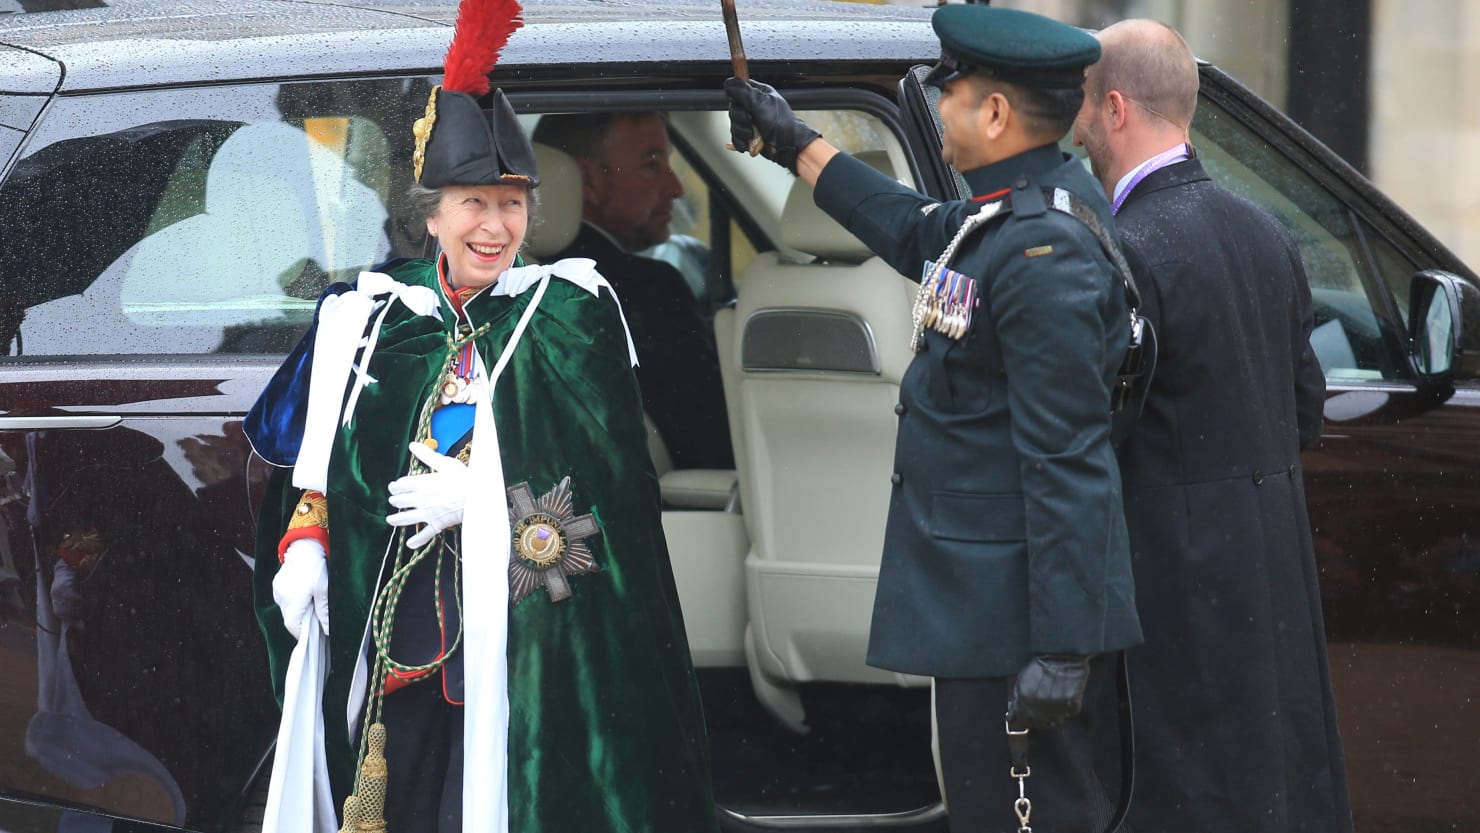 Princess Anne wins the coronation with Swagger – and Block’s hat